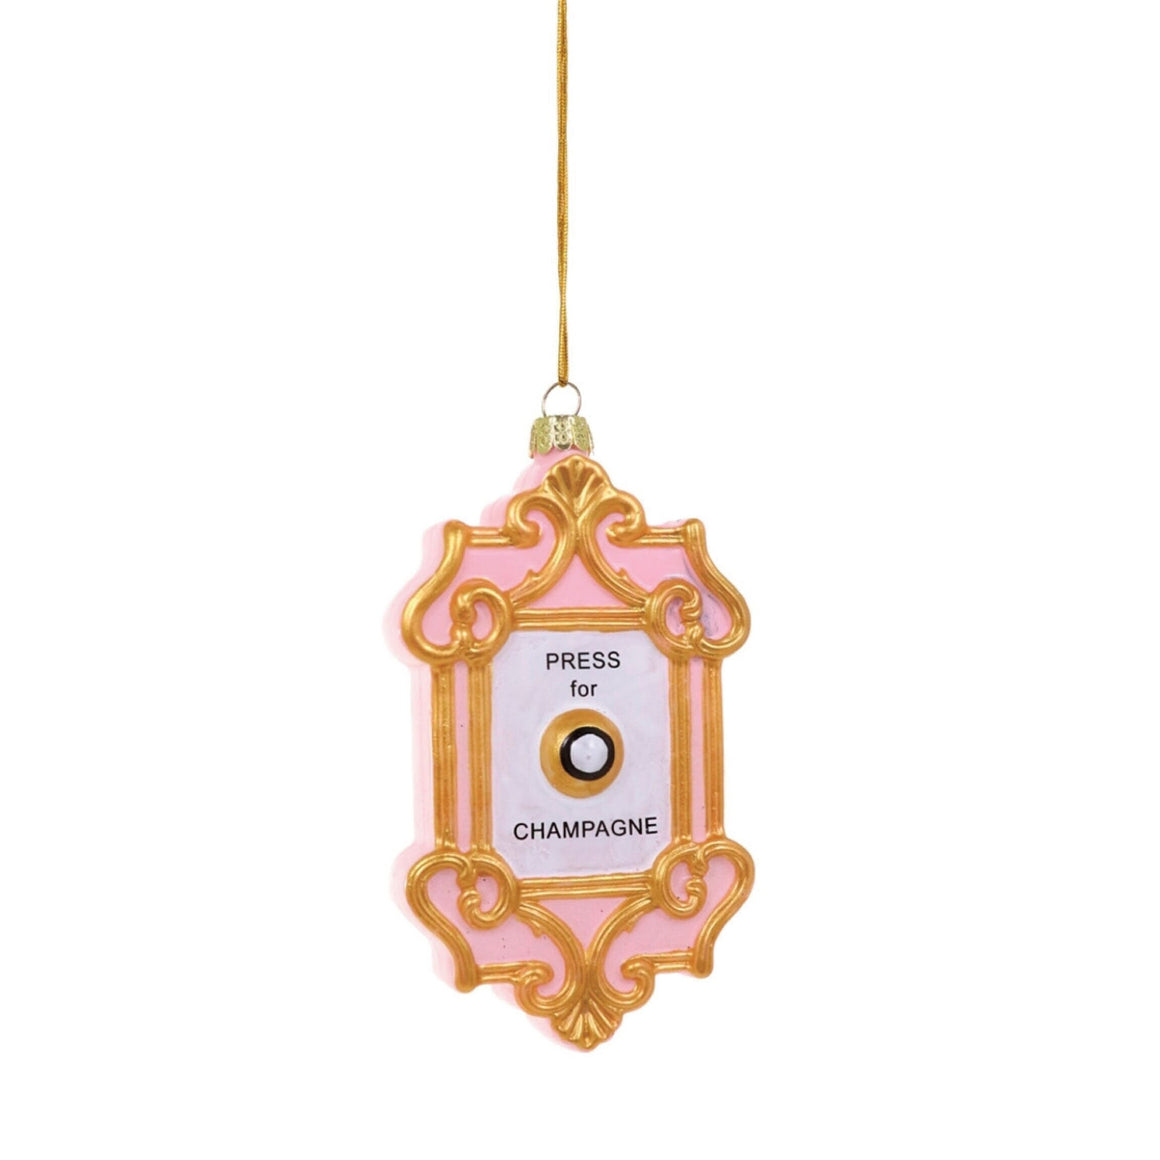 HEIRLOOM GLASS ORNAMENTS - CODY FOSTER PINK CHAMPAGNE BUTTON